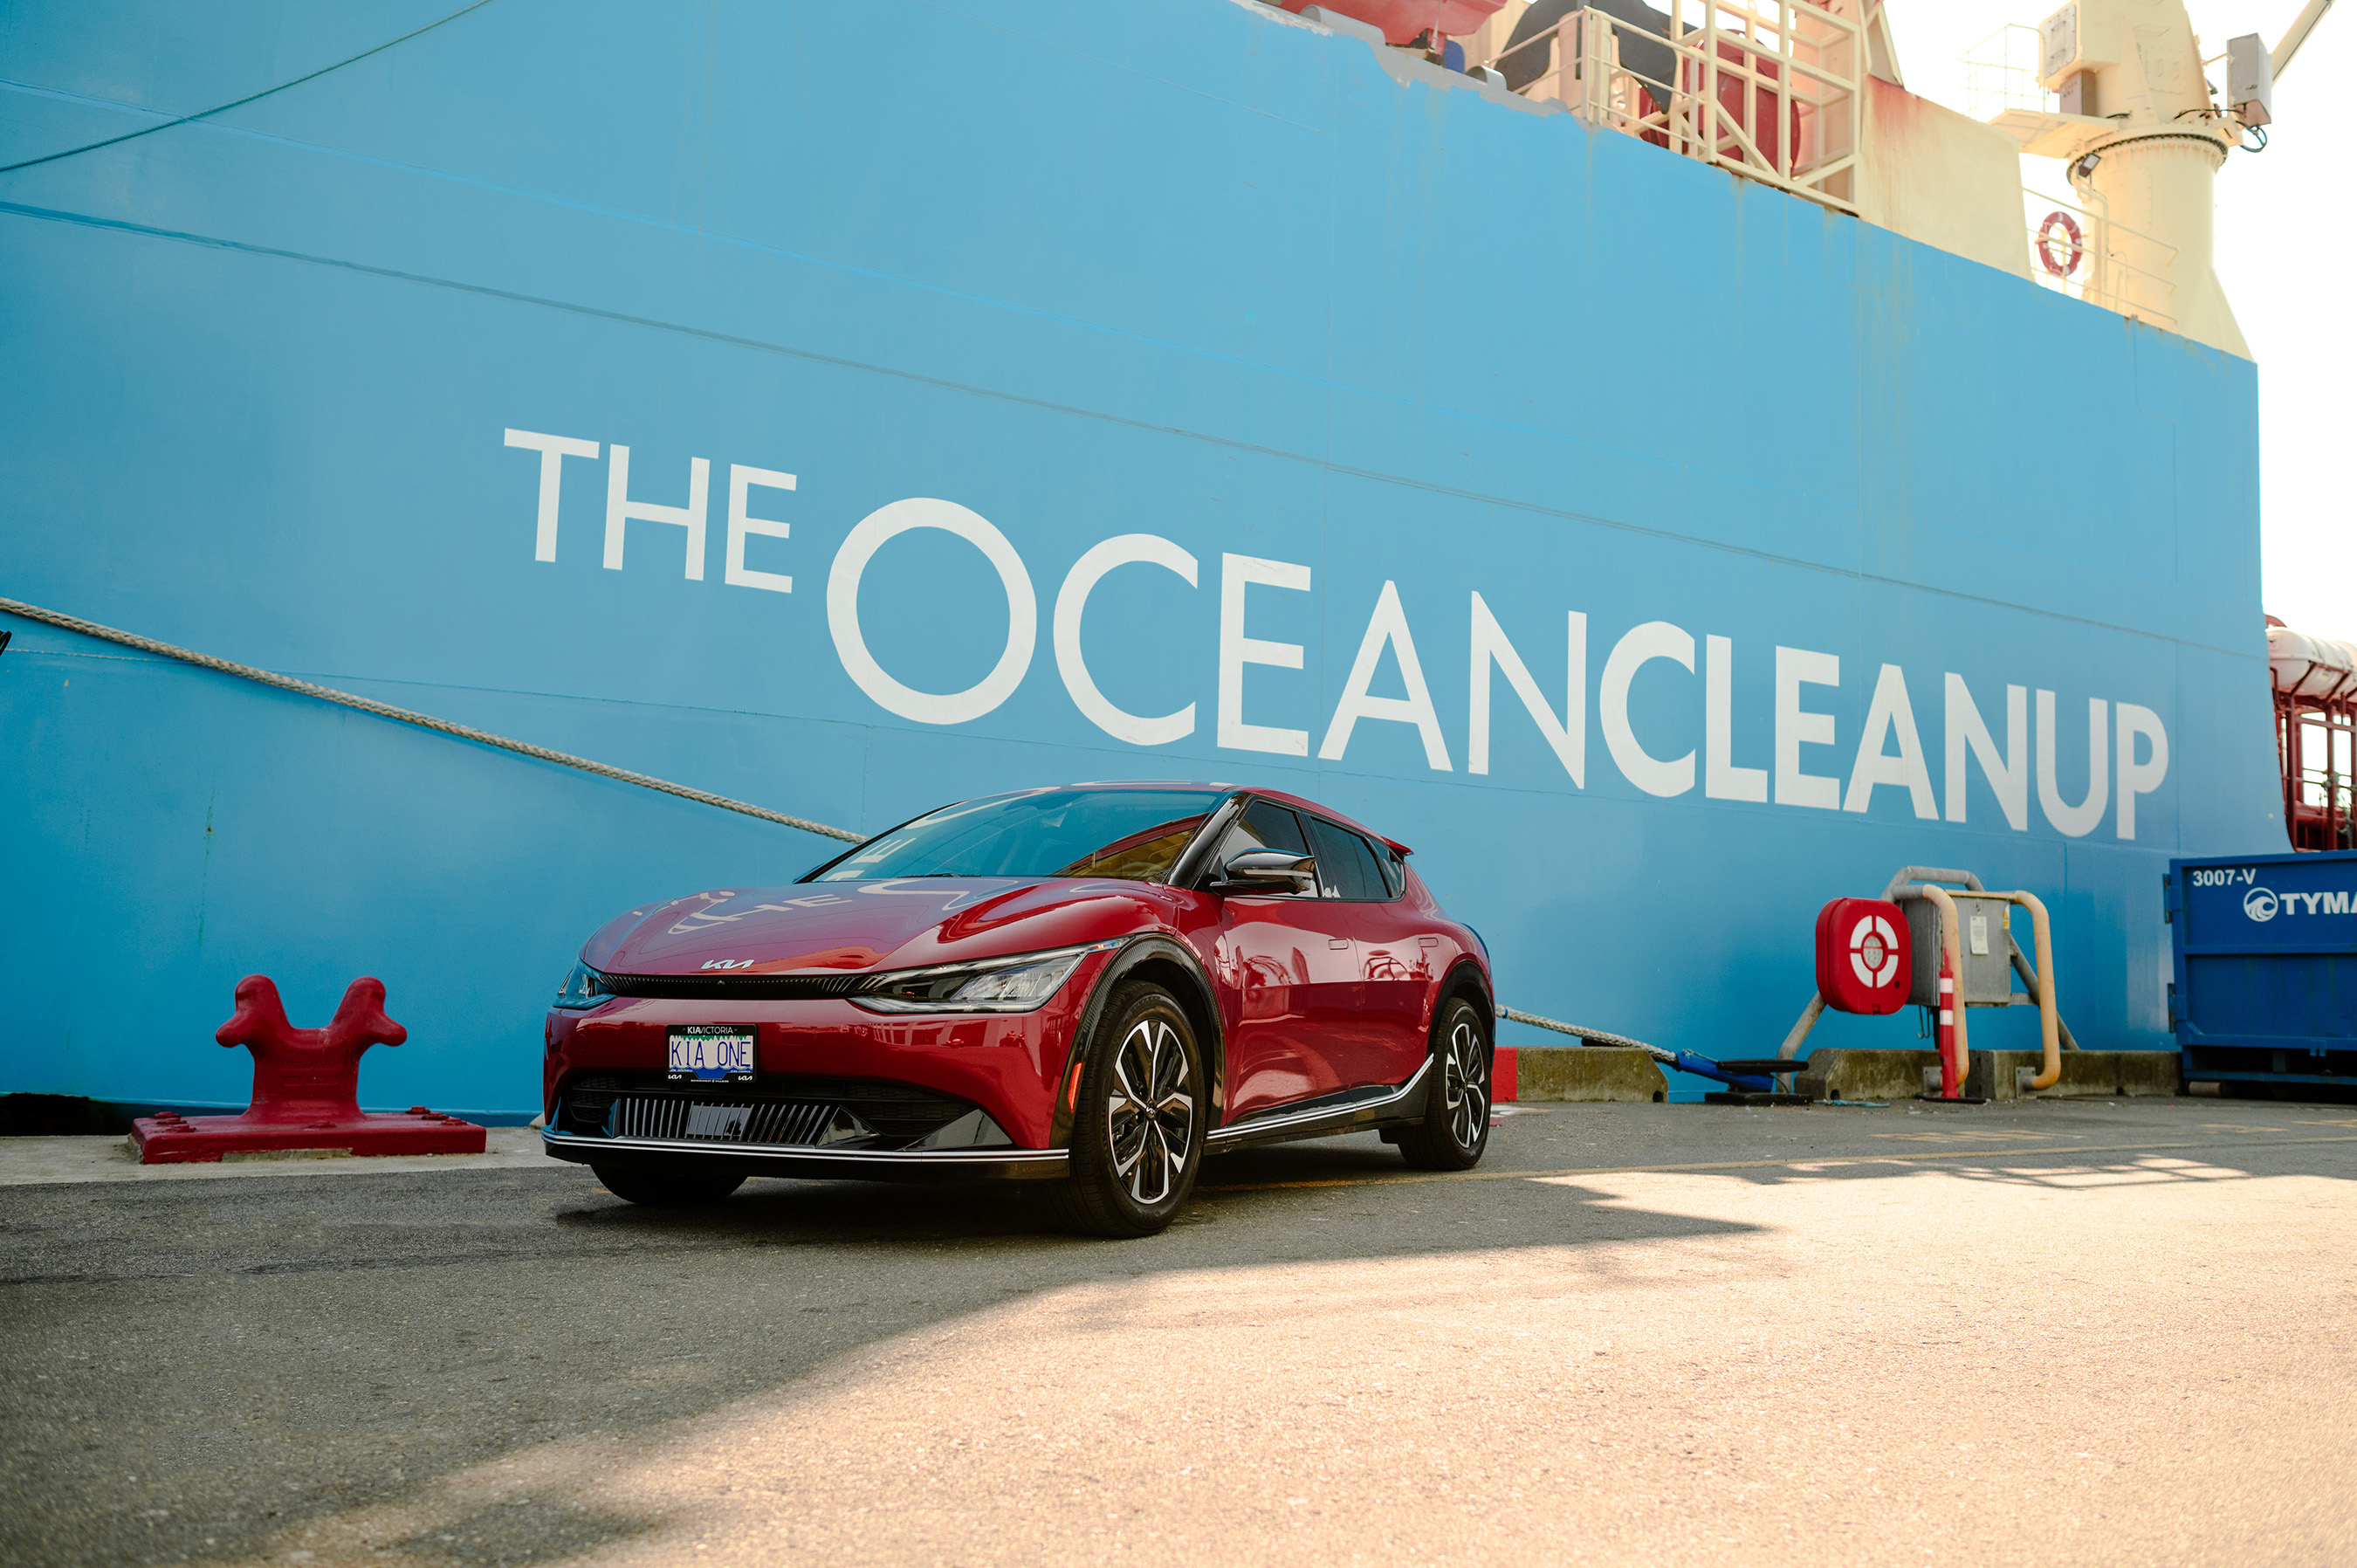 Kia’s goal is to use certain recycled plastics reclaimed from the Pacific Ocean in the brand’s new EV models.